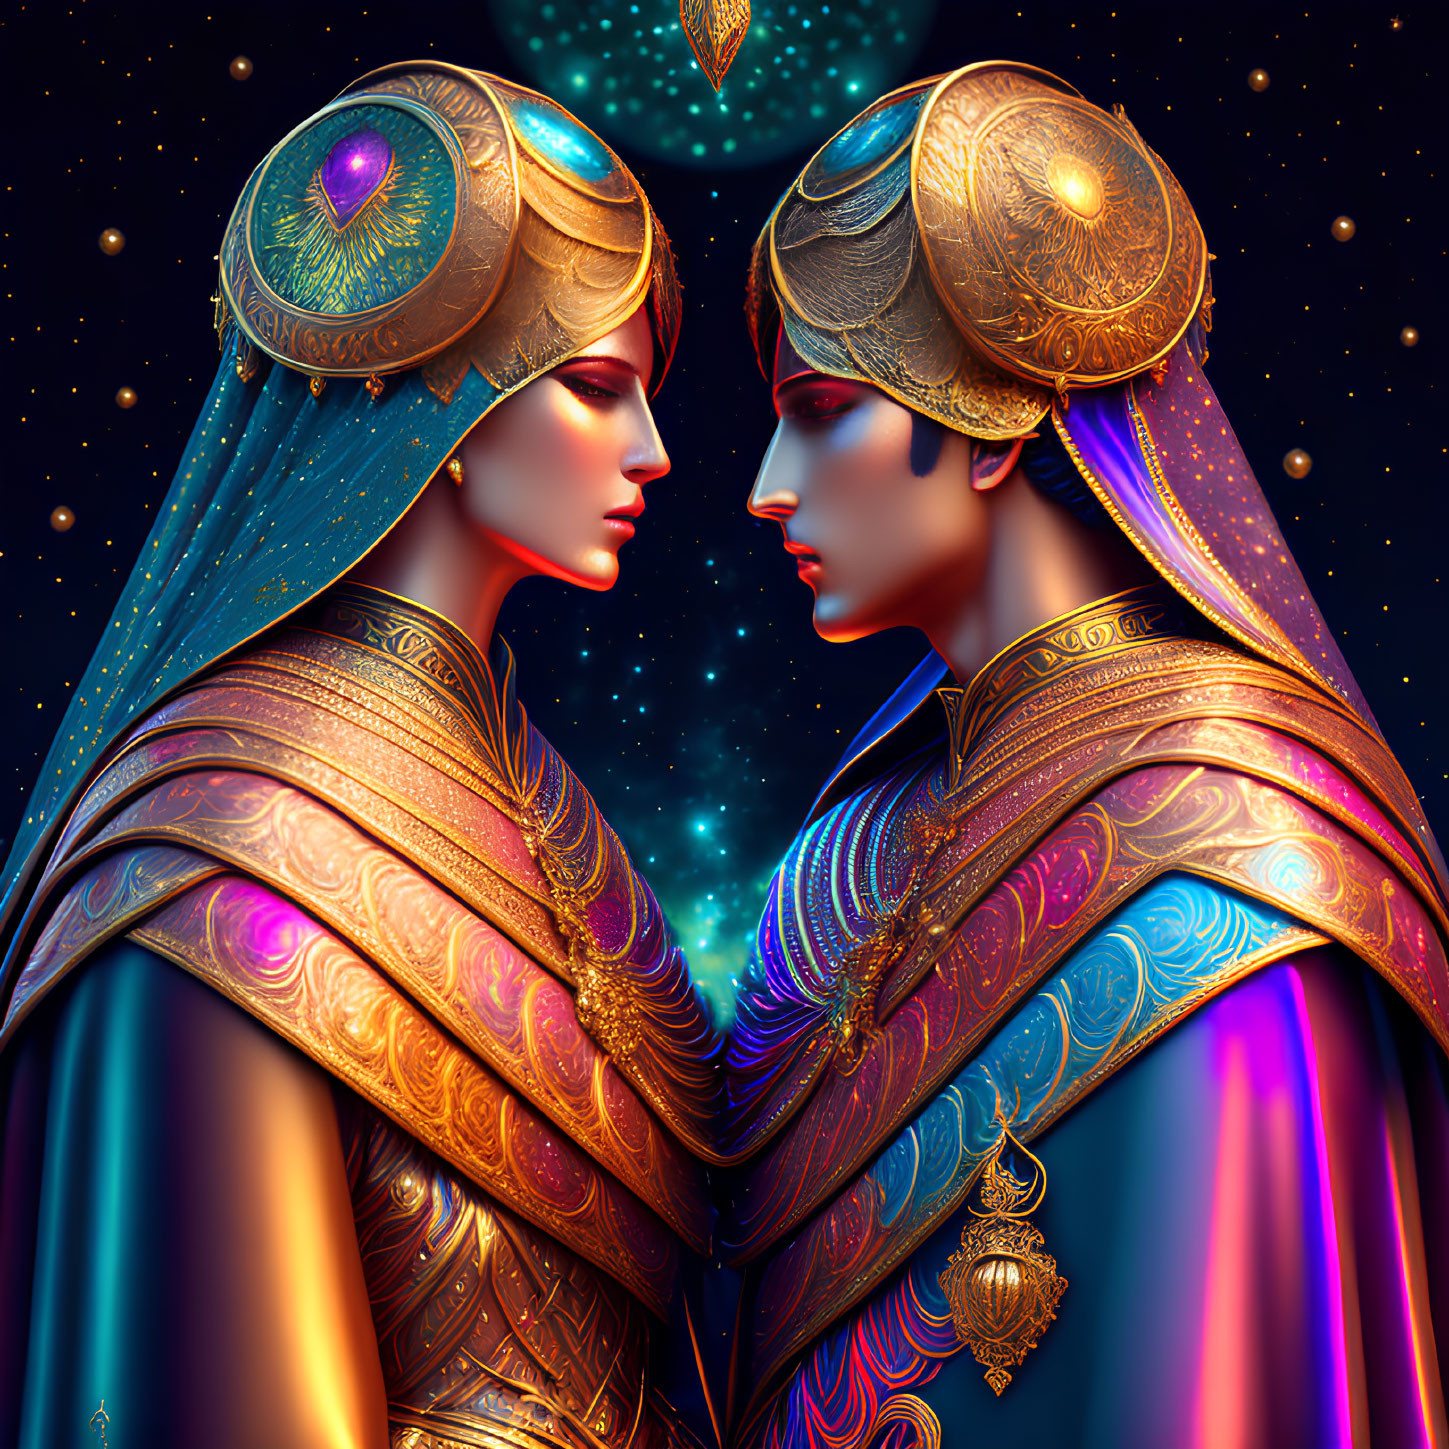 Stylized characters in elaborate headdresses and garments against starry backdrop